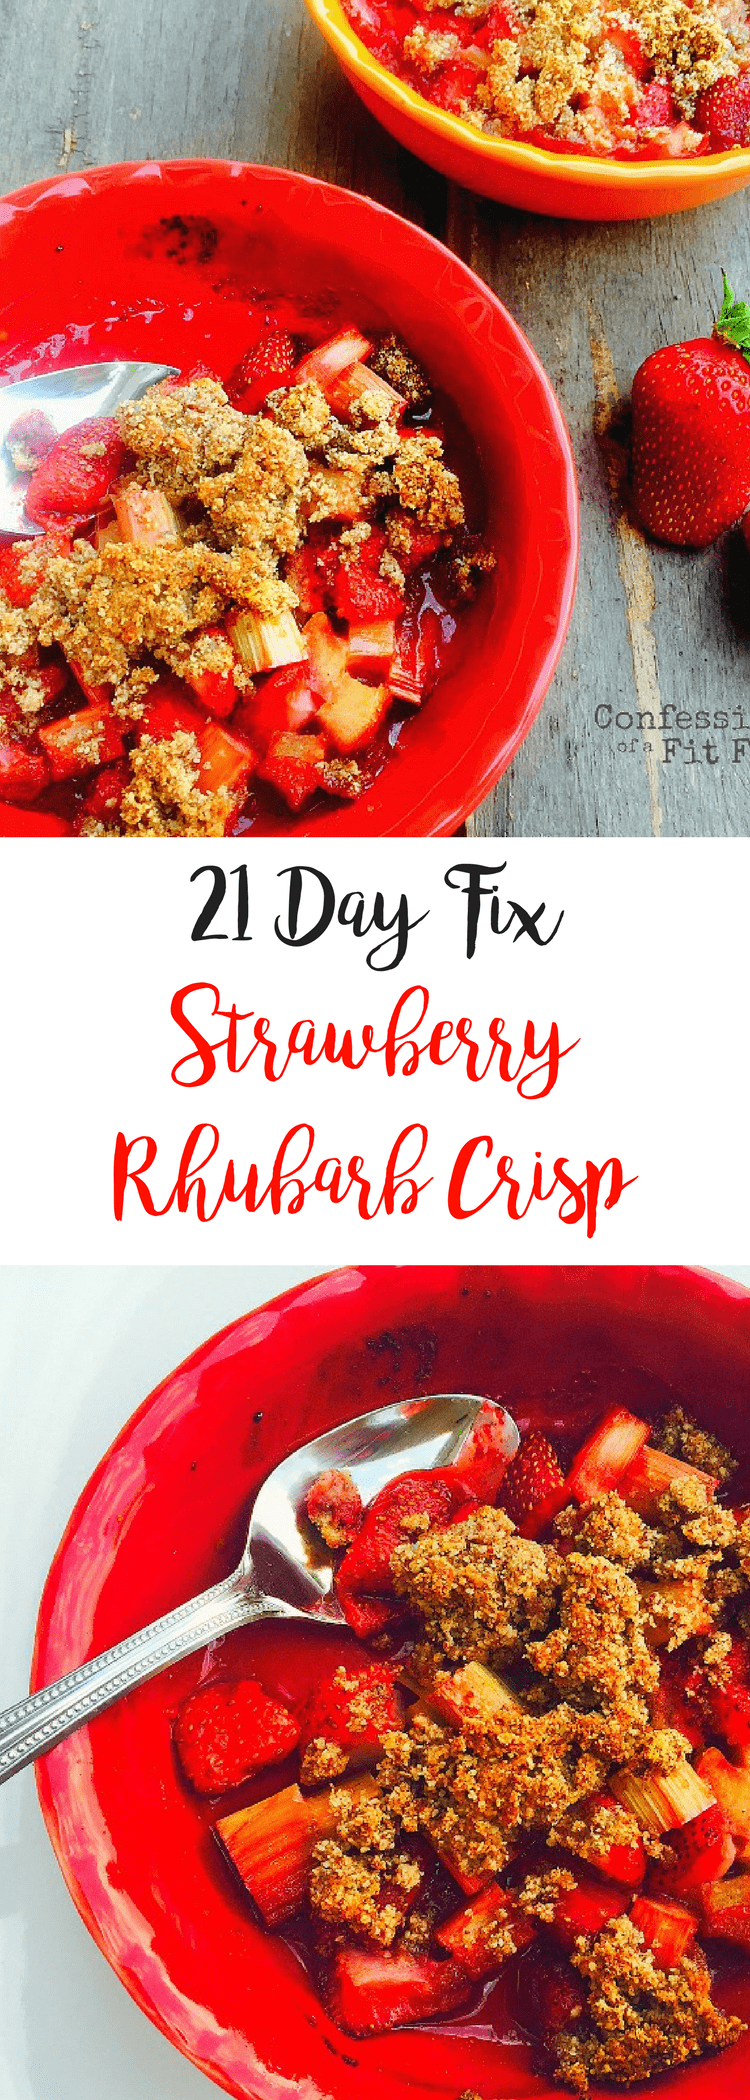 21 Day Fix Strawberry Rhubarb Crisp | Confessions of a Fit Foodie